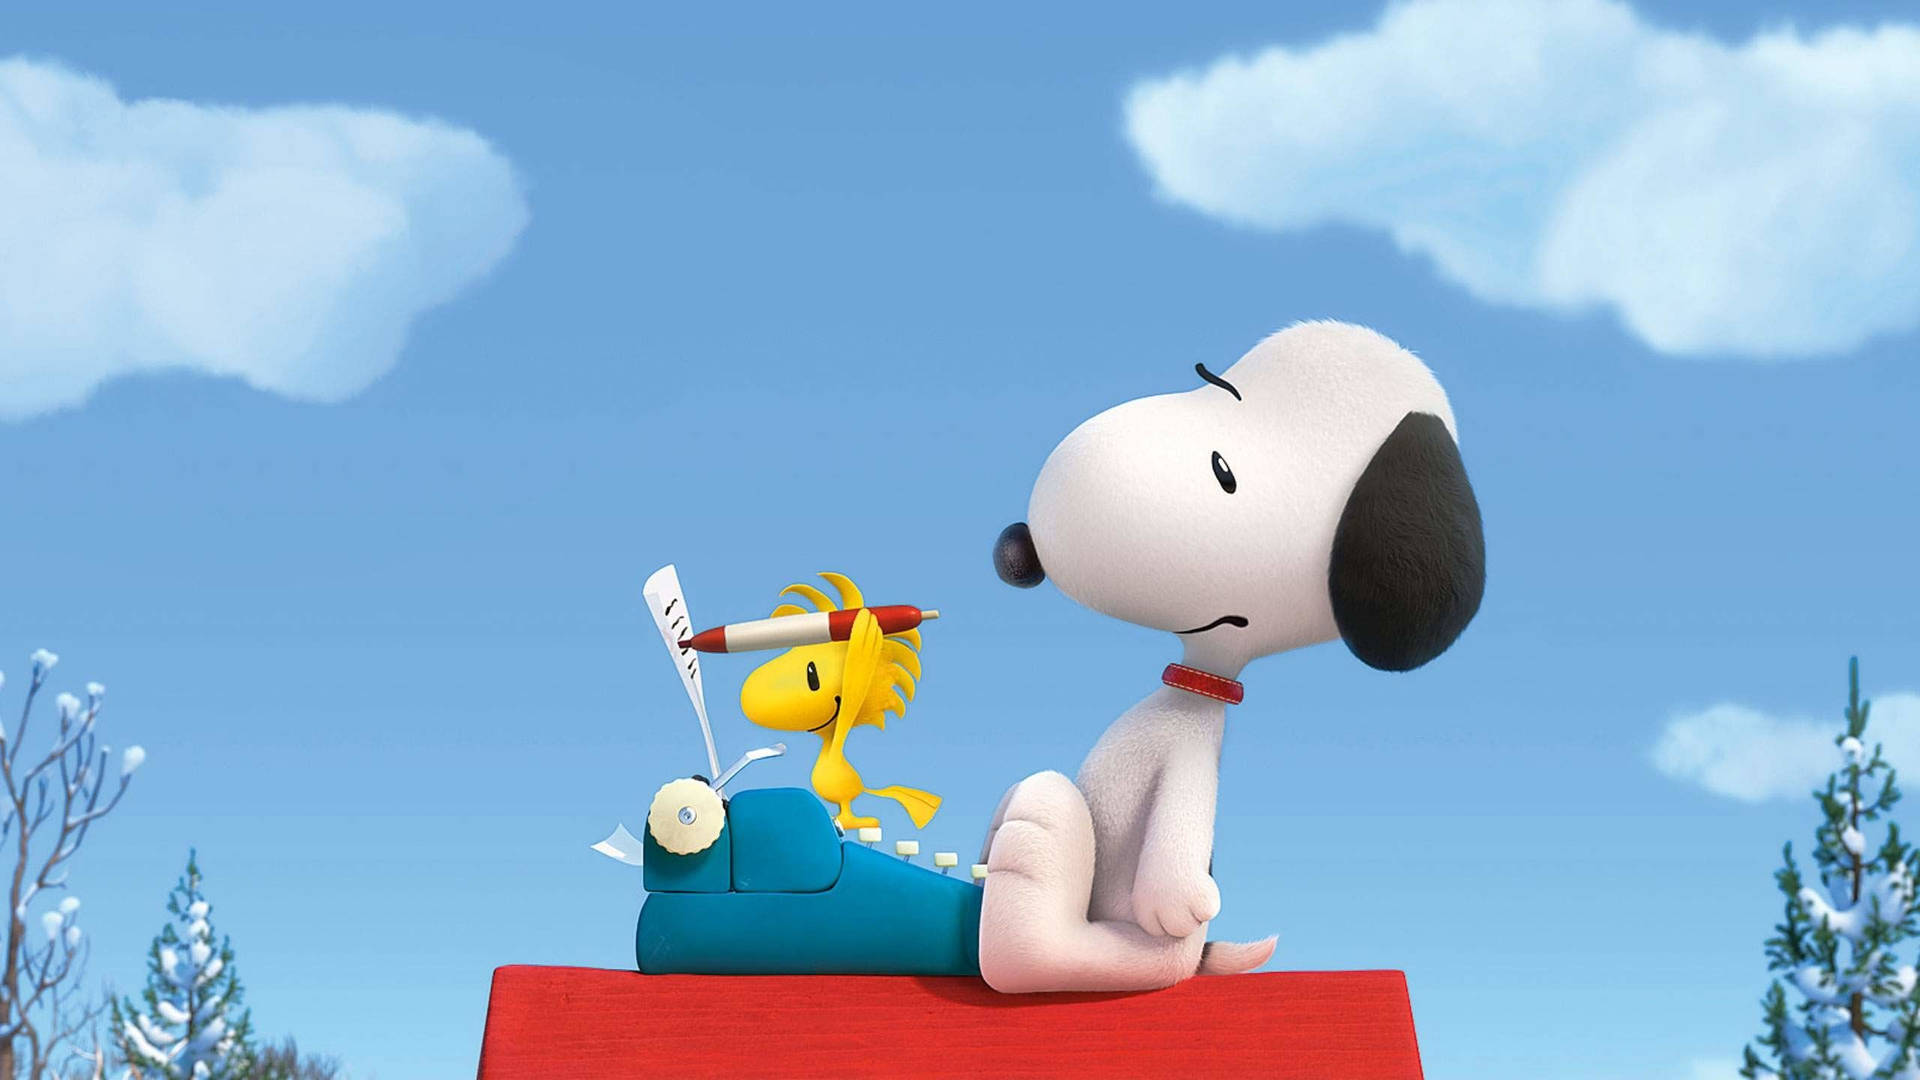 Free Snoopy Wallpaper Downloads, Snoopy Wallpaper for FREE